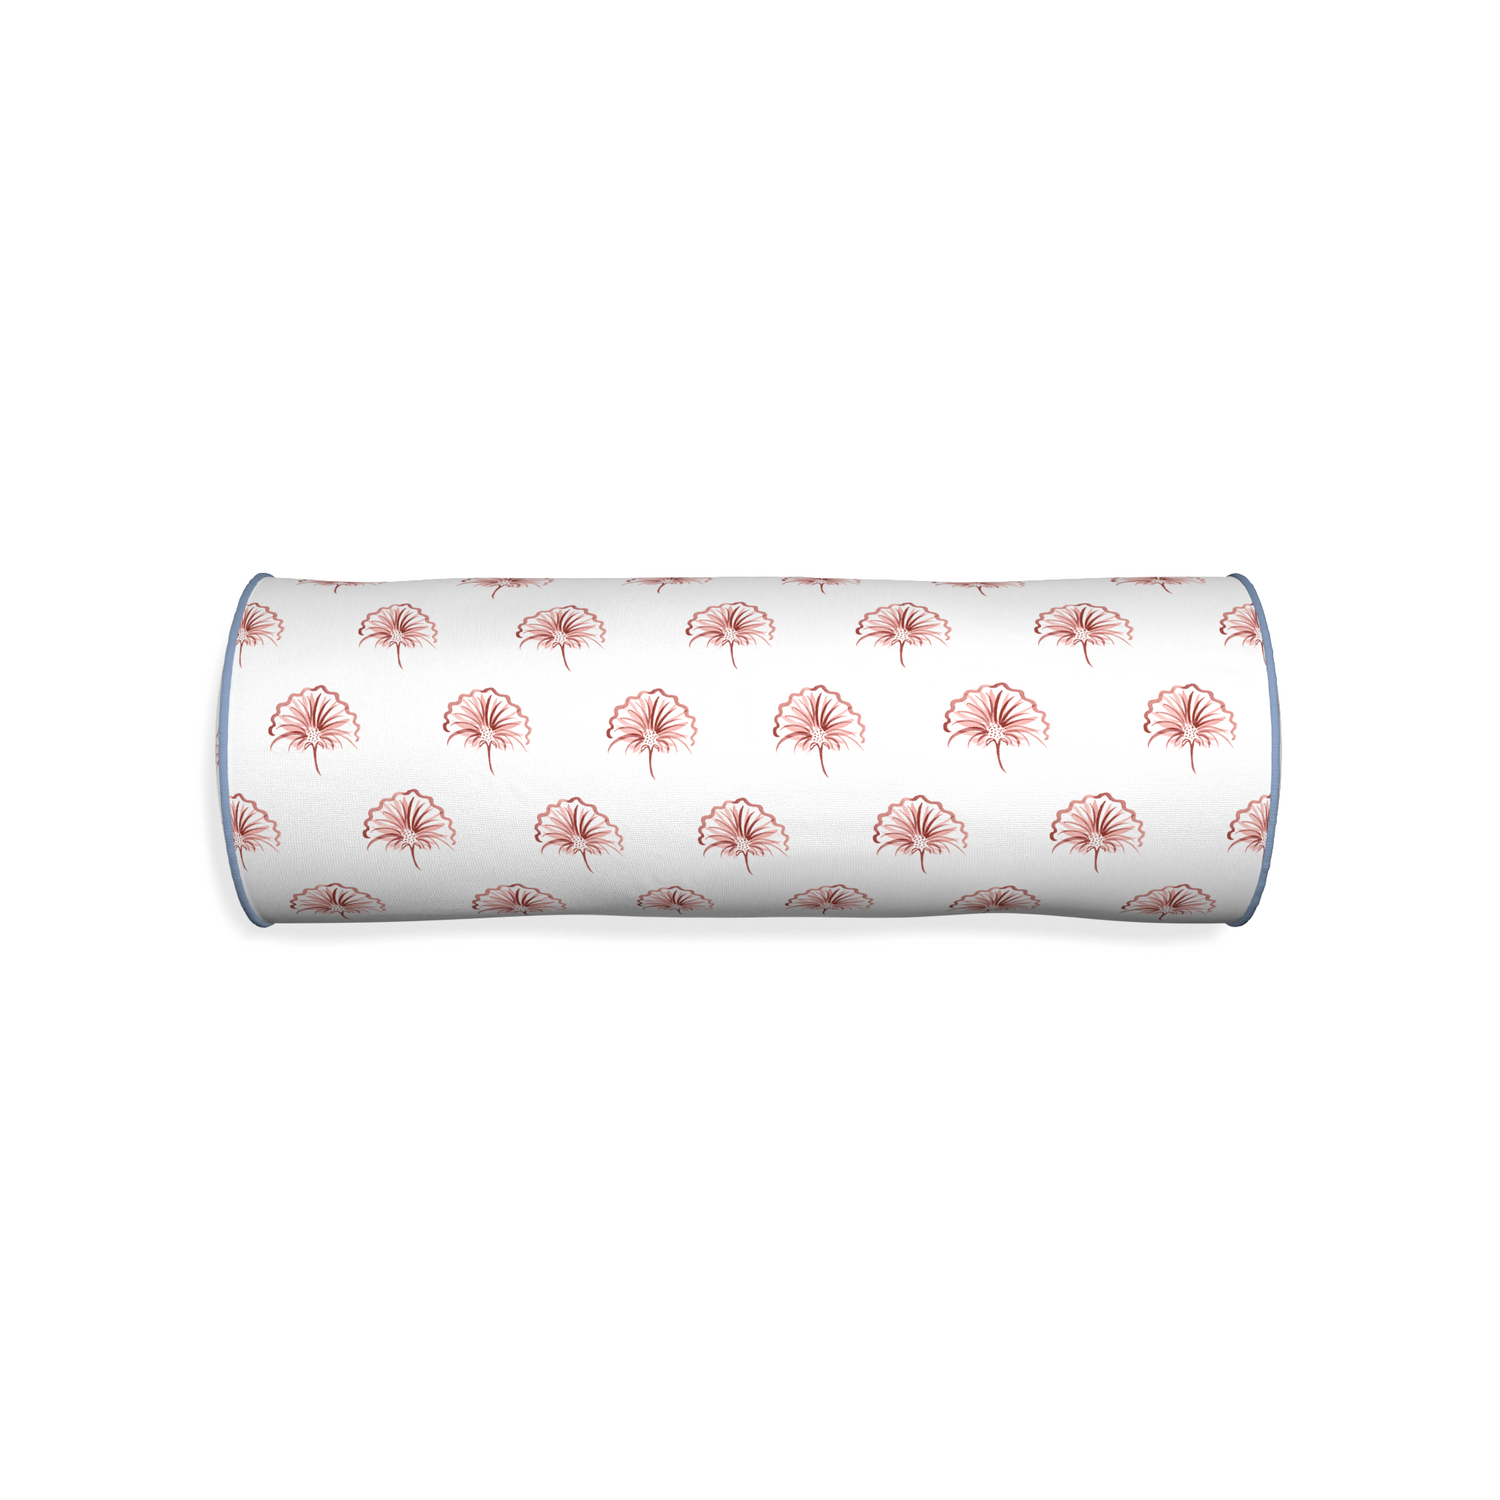 Bolster penelope rose custom floral pinkpillow with sky piping on white background